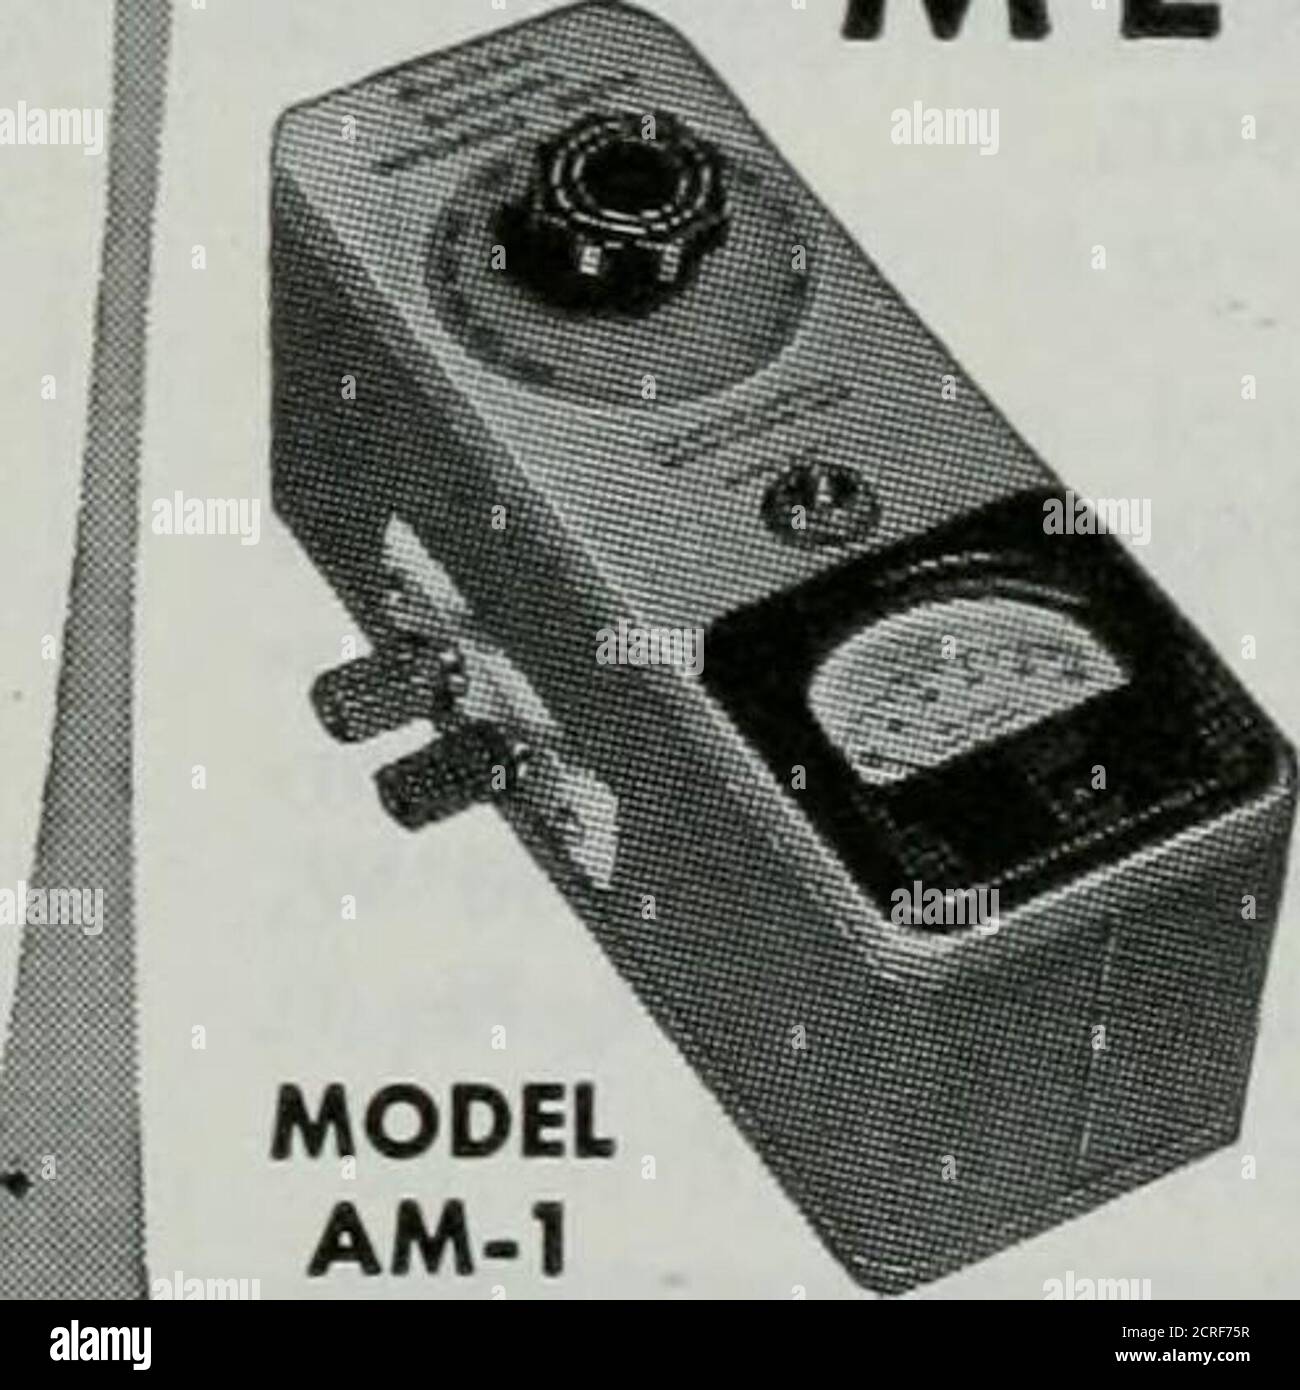 QST . MODEL AC-1 $145^0 Shpg. Wf.4 lbs. l¥eCitA&it ANTENNA IMPEDANCE METER  KIT Use the Model AM-1 in con-jimction with a signal sourcefor measuring  antenna im-pedance, line matching pur-poses, adjustment of